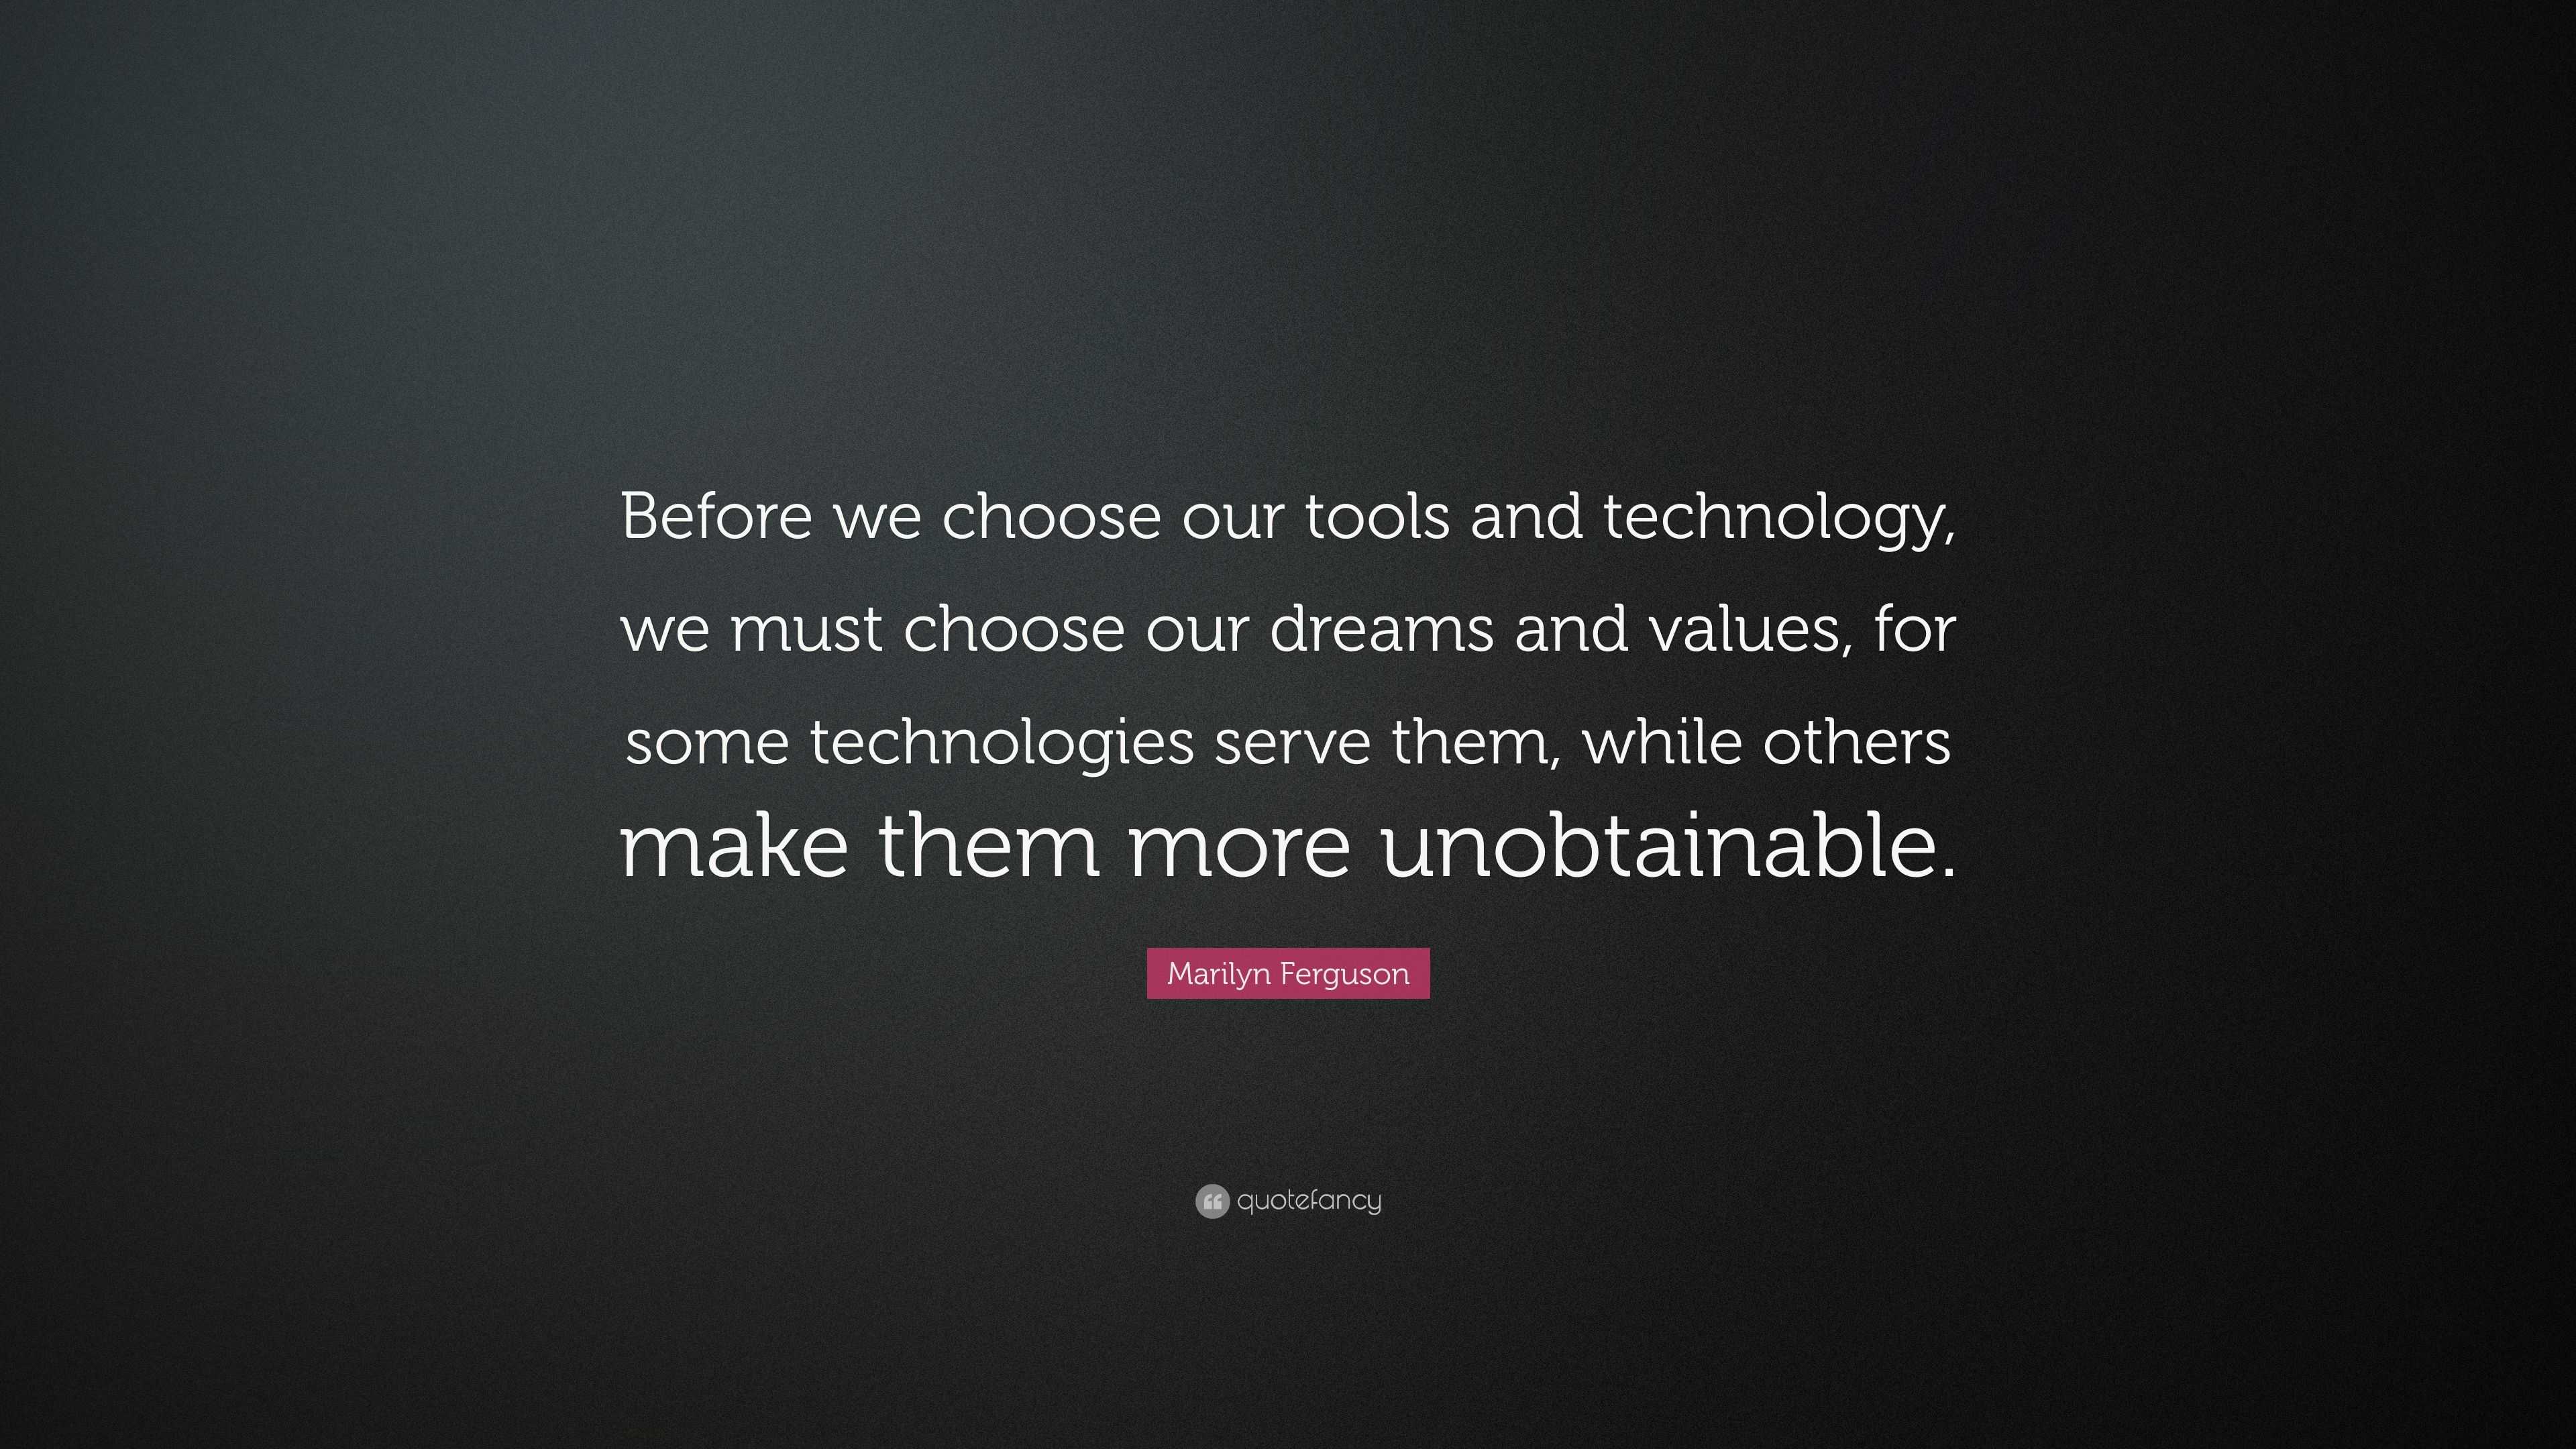 Marilyn Ferguson Quote: “Before we choose our tools and technology, we ...